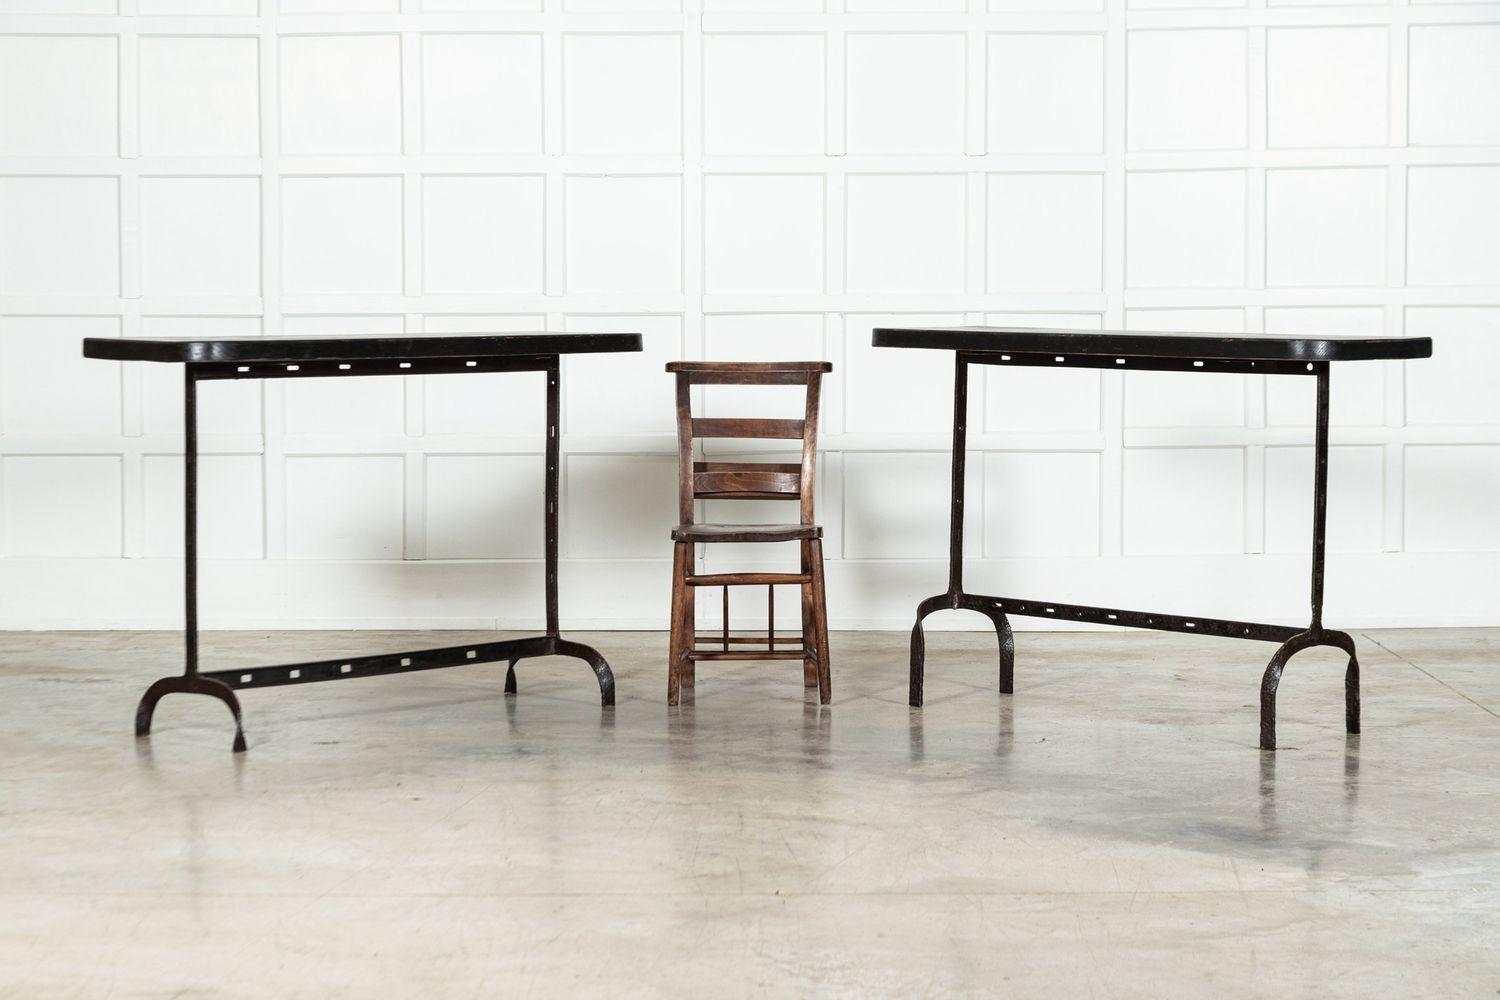 circa 1900
Pair English Wrought Iron Pine Console Tables
sku 1806
(price is each)
W138 x D43 x H92 cm
Weight 26 kg